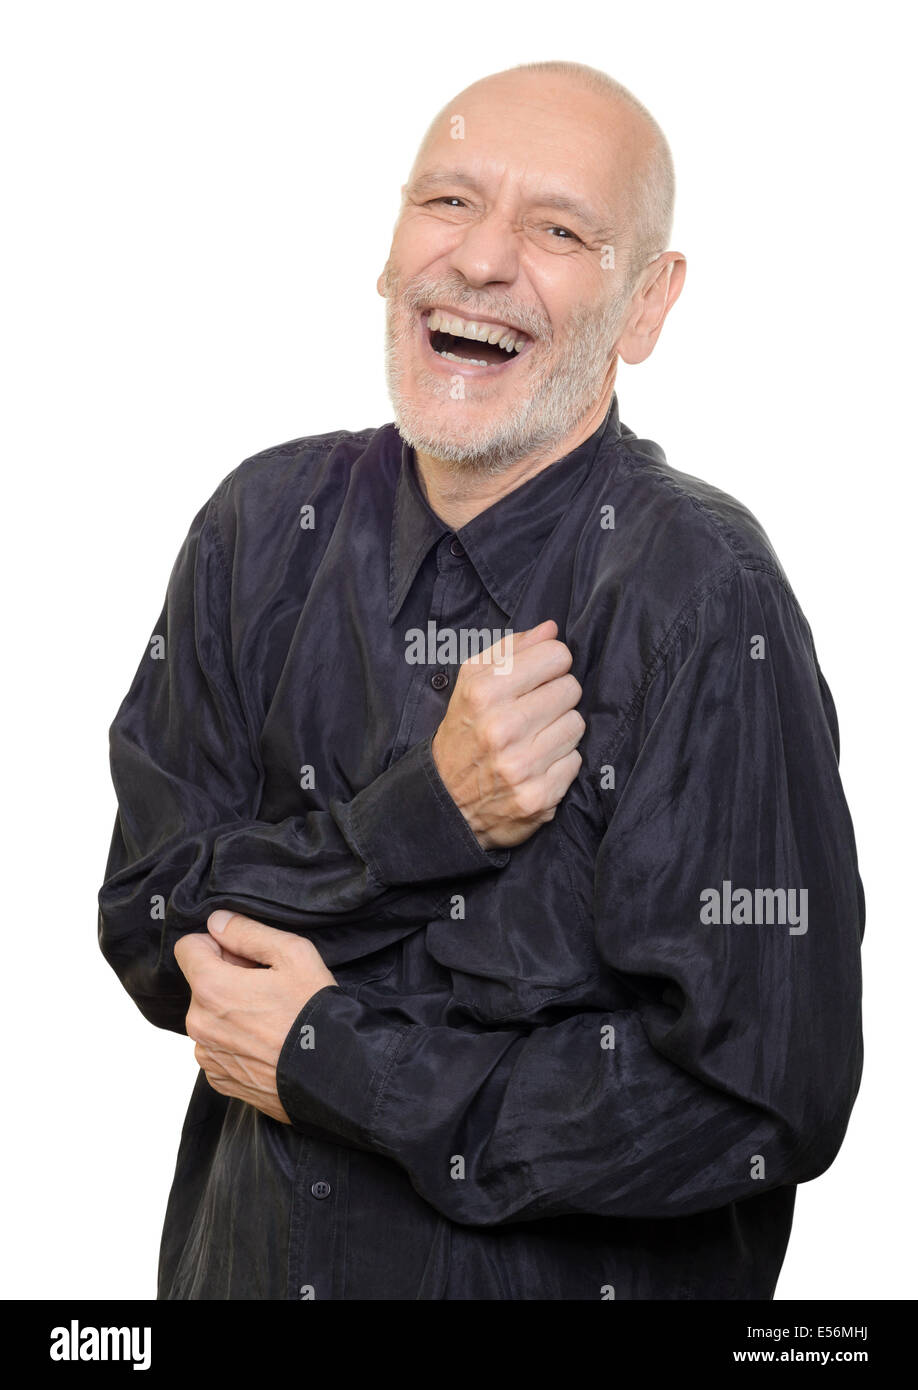 Man with black silk shirt laughing out loud, isolated on white background Stock Photo